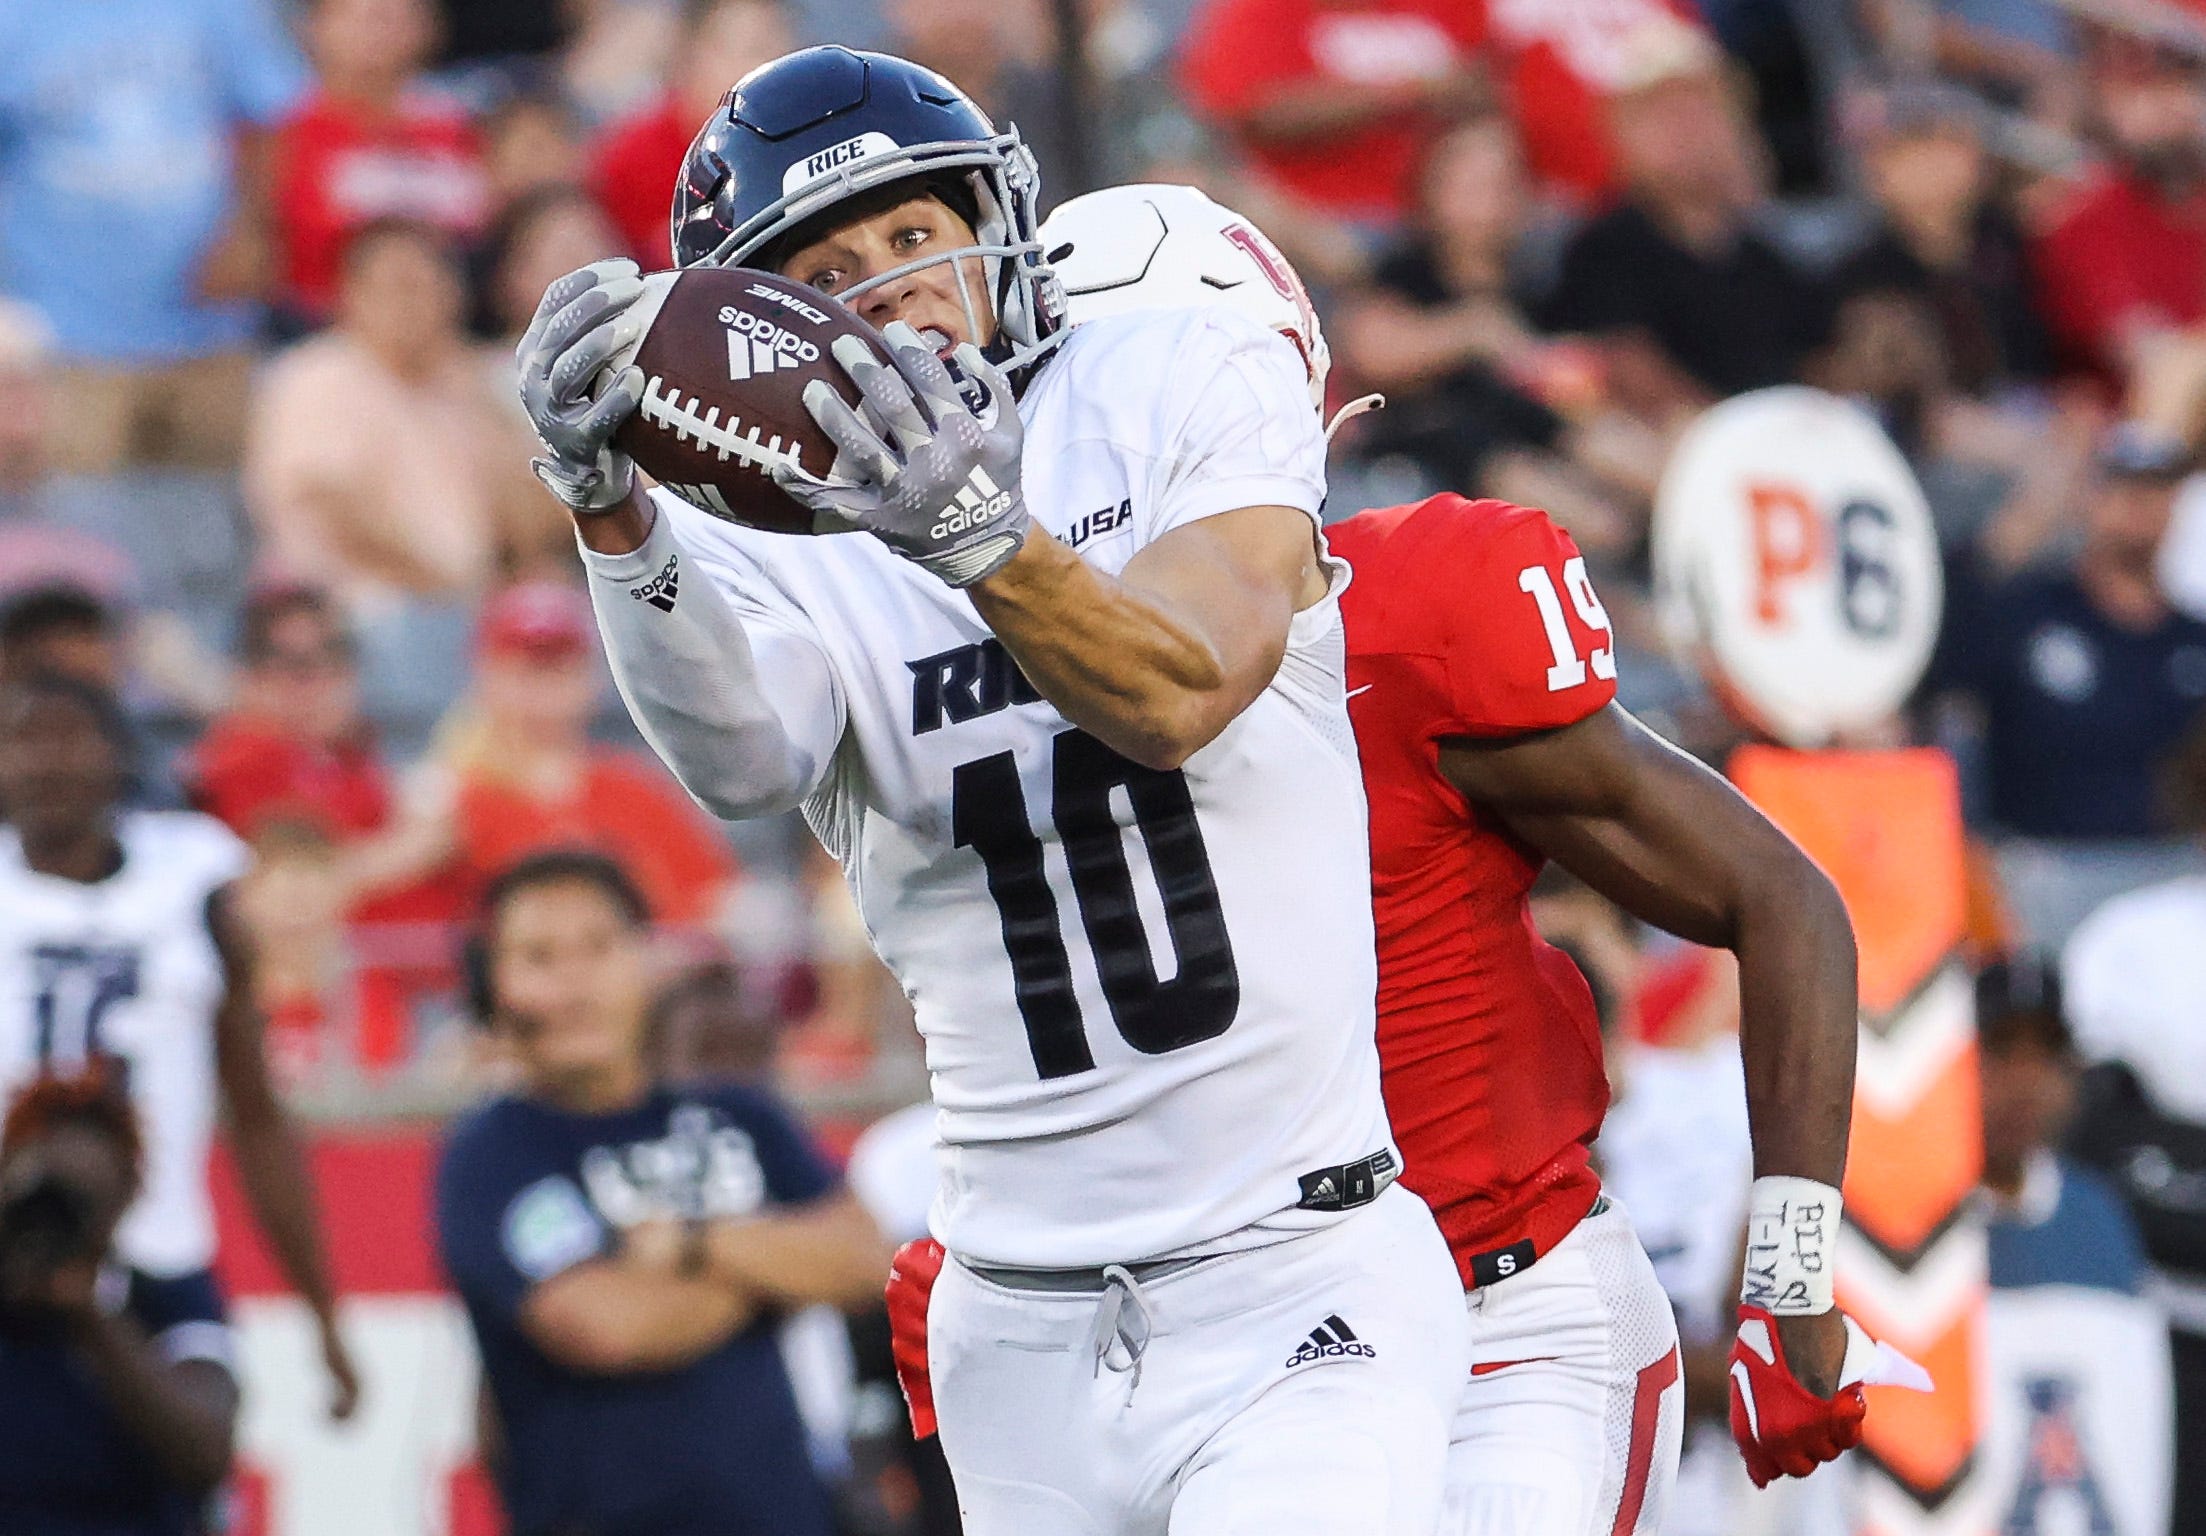 wide receiver with a qb mentality: rice's luke mccaffrey projects as versatile asset in nfl